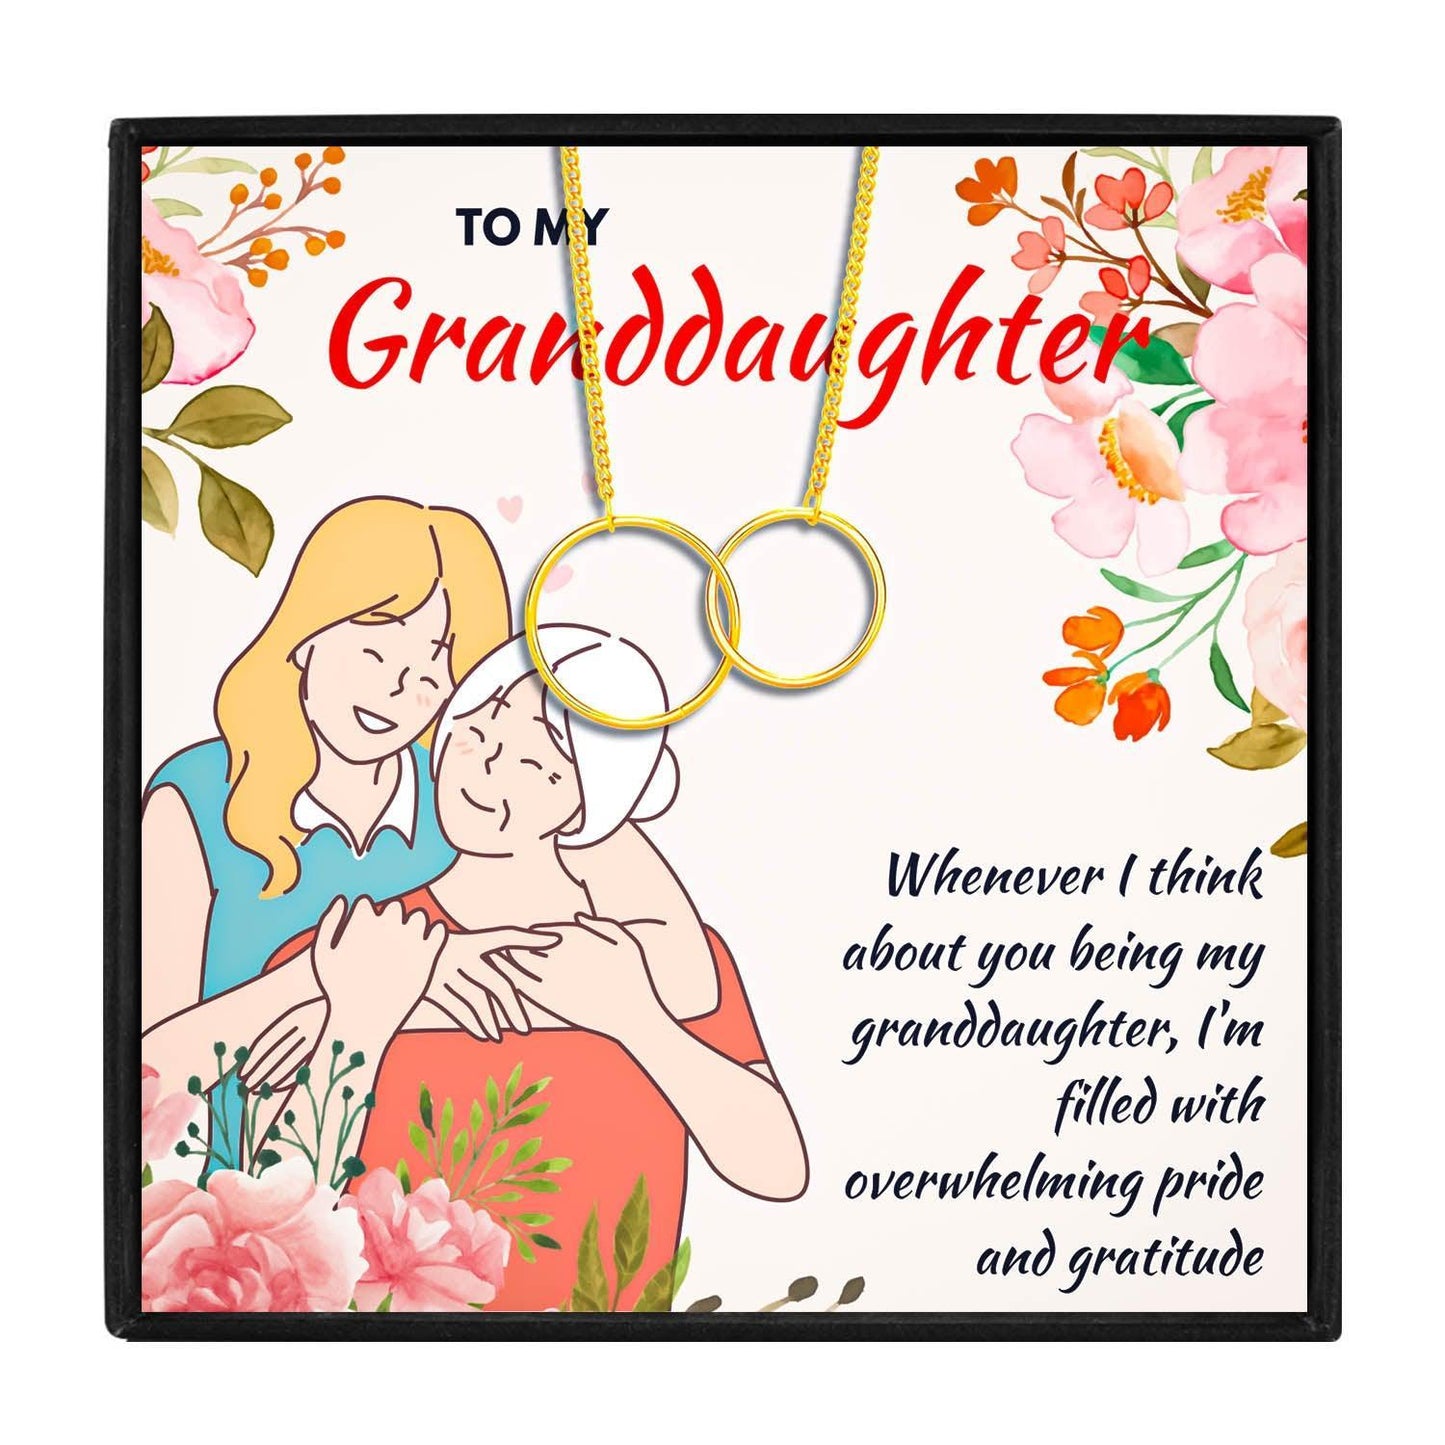 Birthday Gifts For Granddaughter From Grandma in 2023 | Birthday Gifts For Granddaughter From Grandma - undefined | granddaughter gifts from nana, Granddaughter Necklace, granddaughter necklace from grandma, grandma granddaughter necklace, grandmother granddaughter gifts | From Hunny Life | hunnylife.com